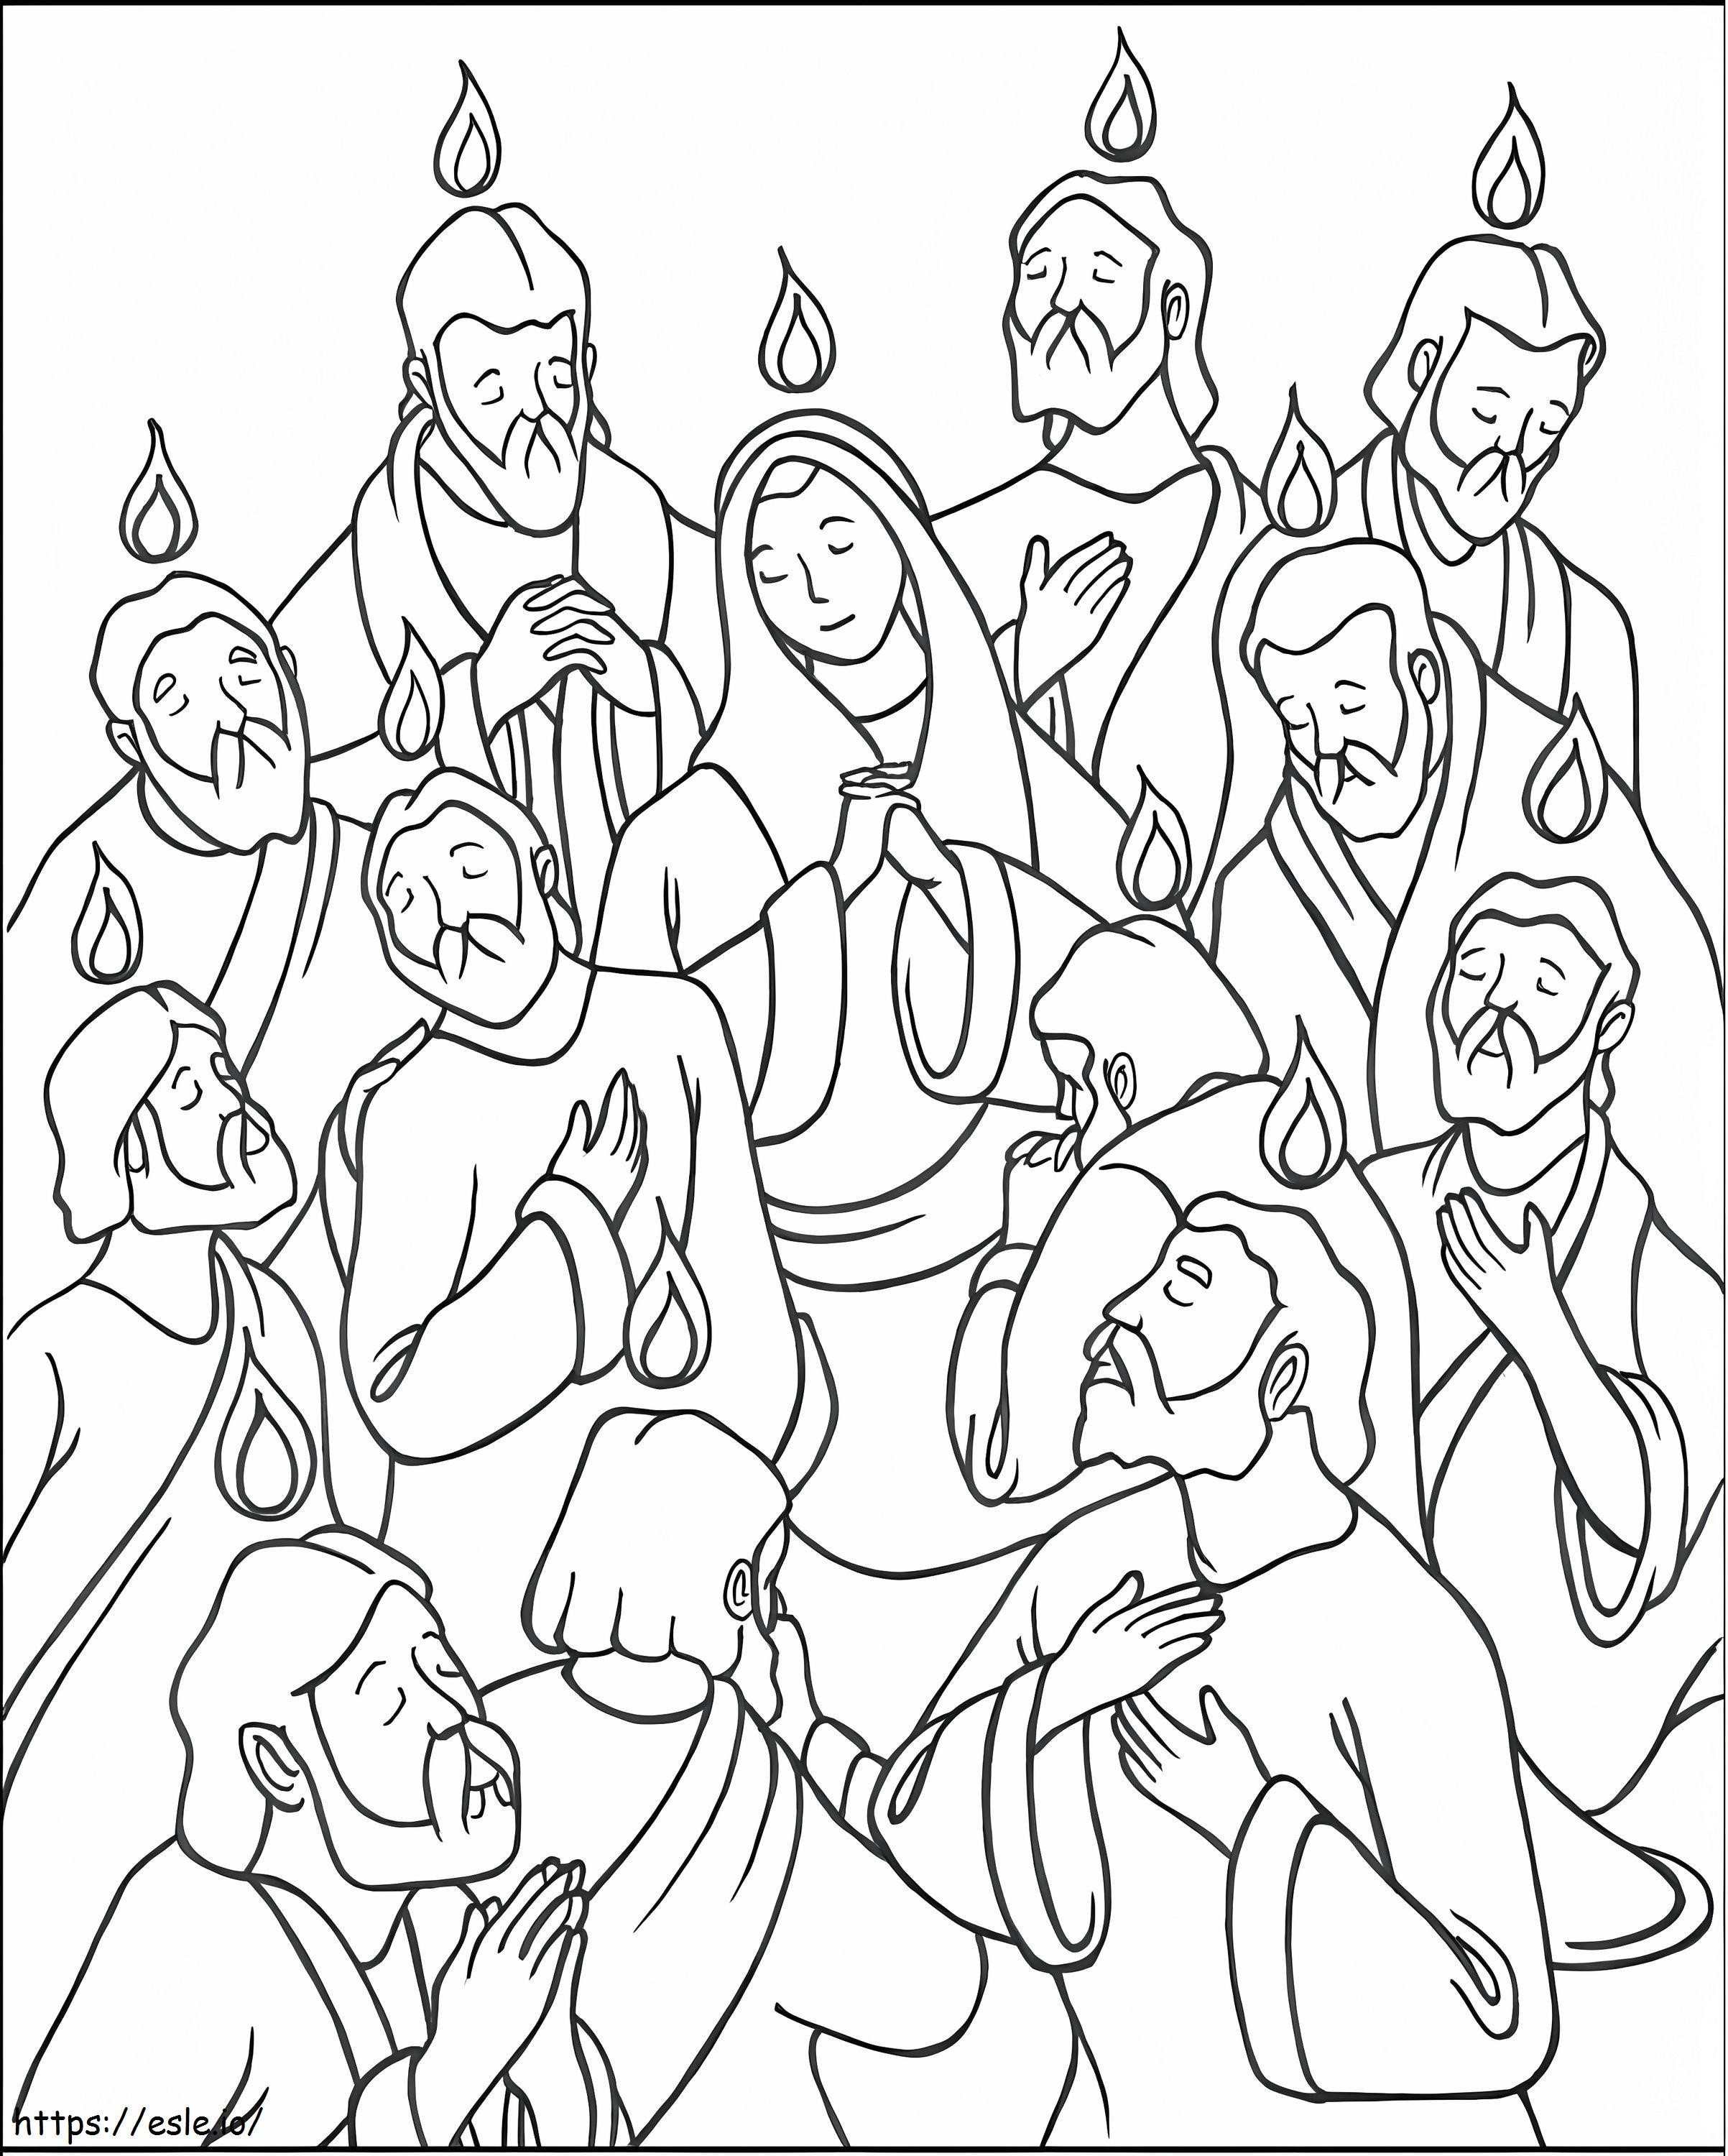 Pentecost 4 coloring page